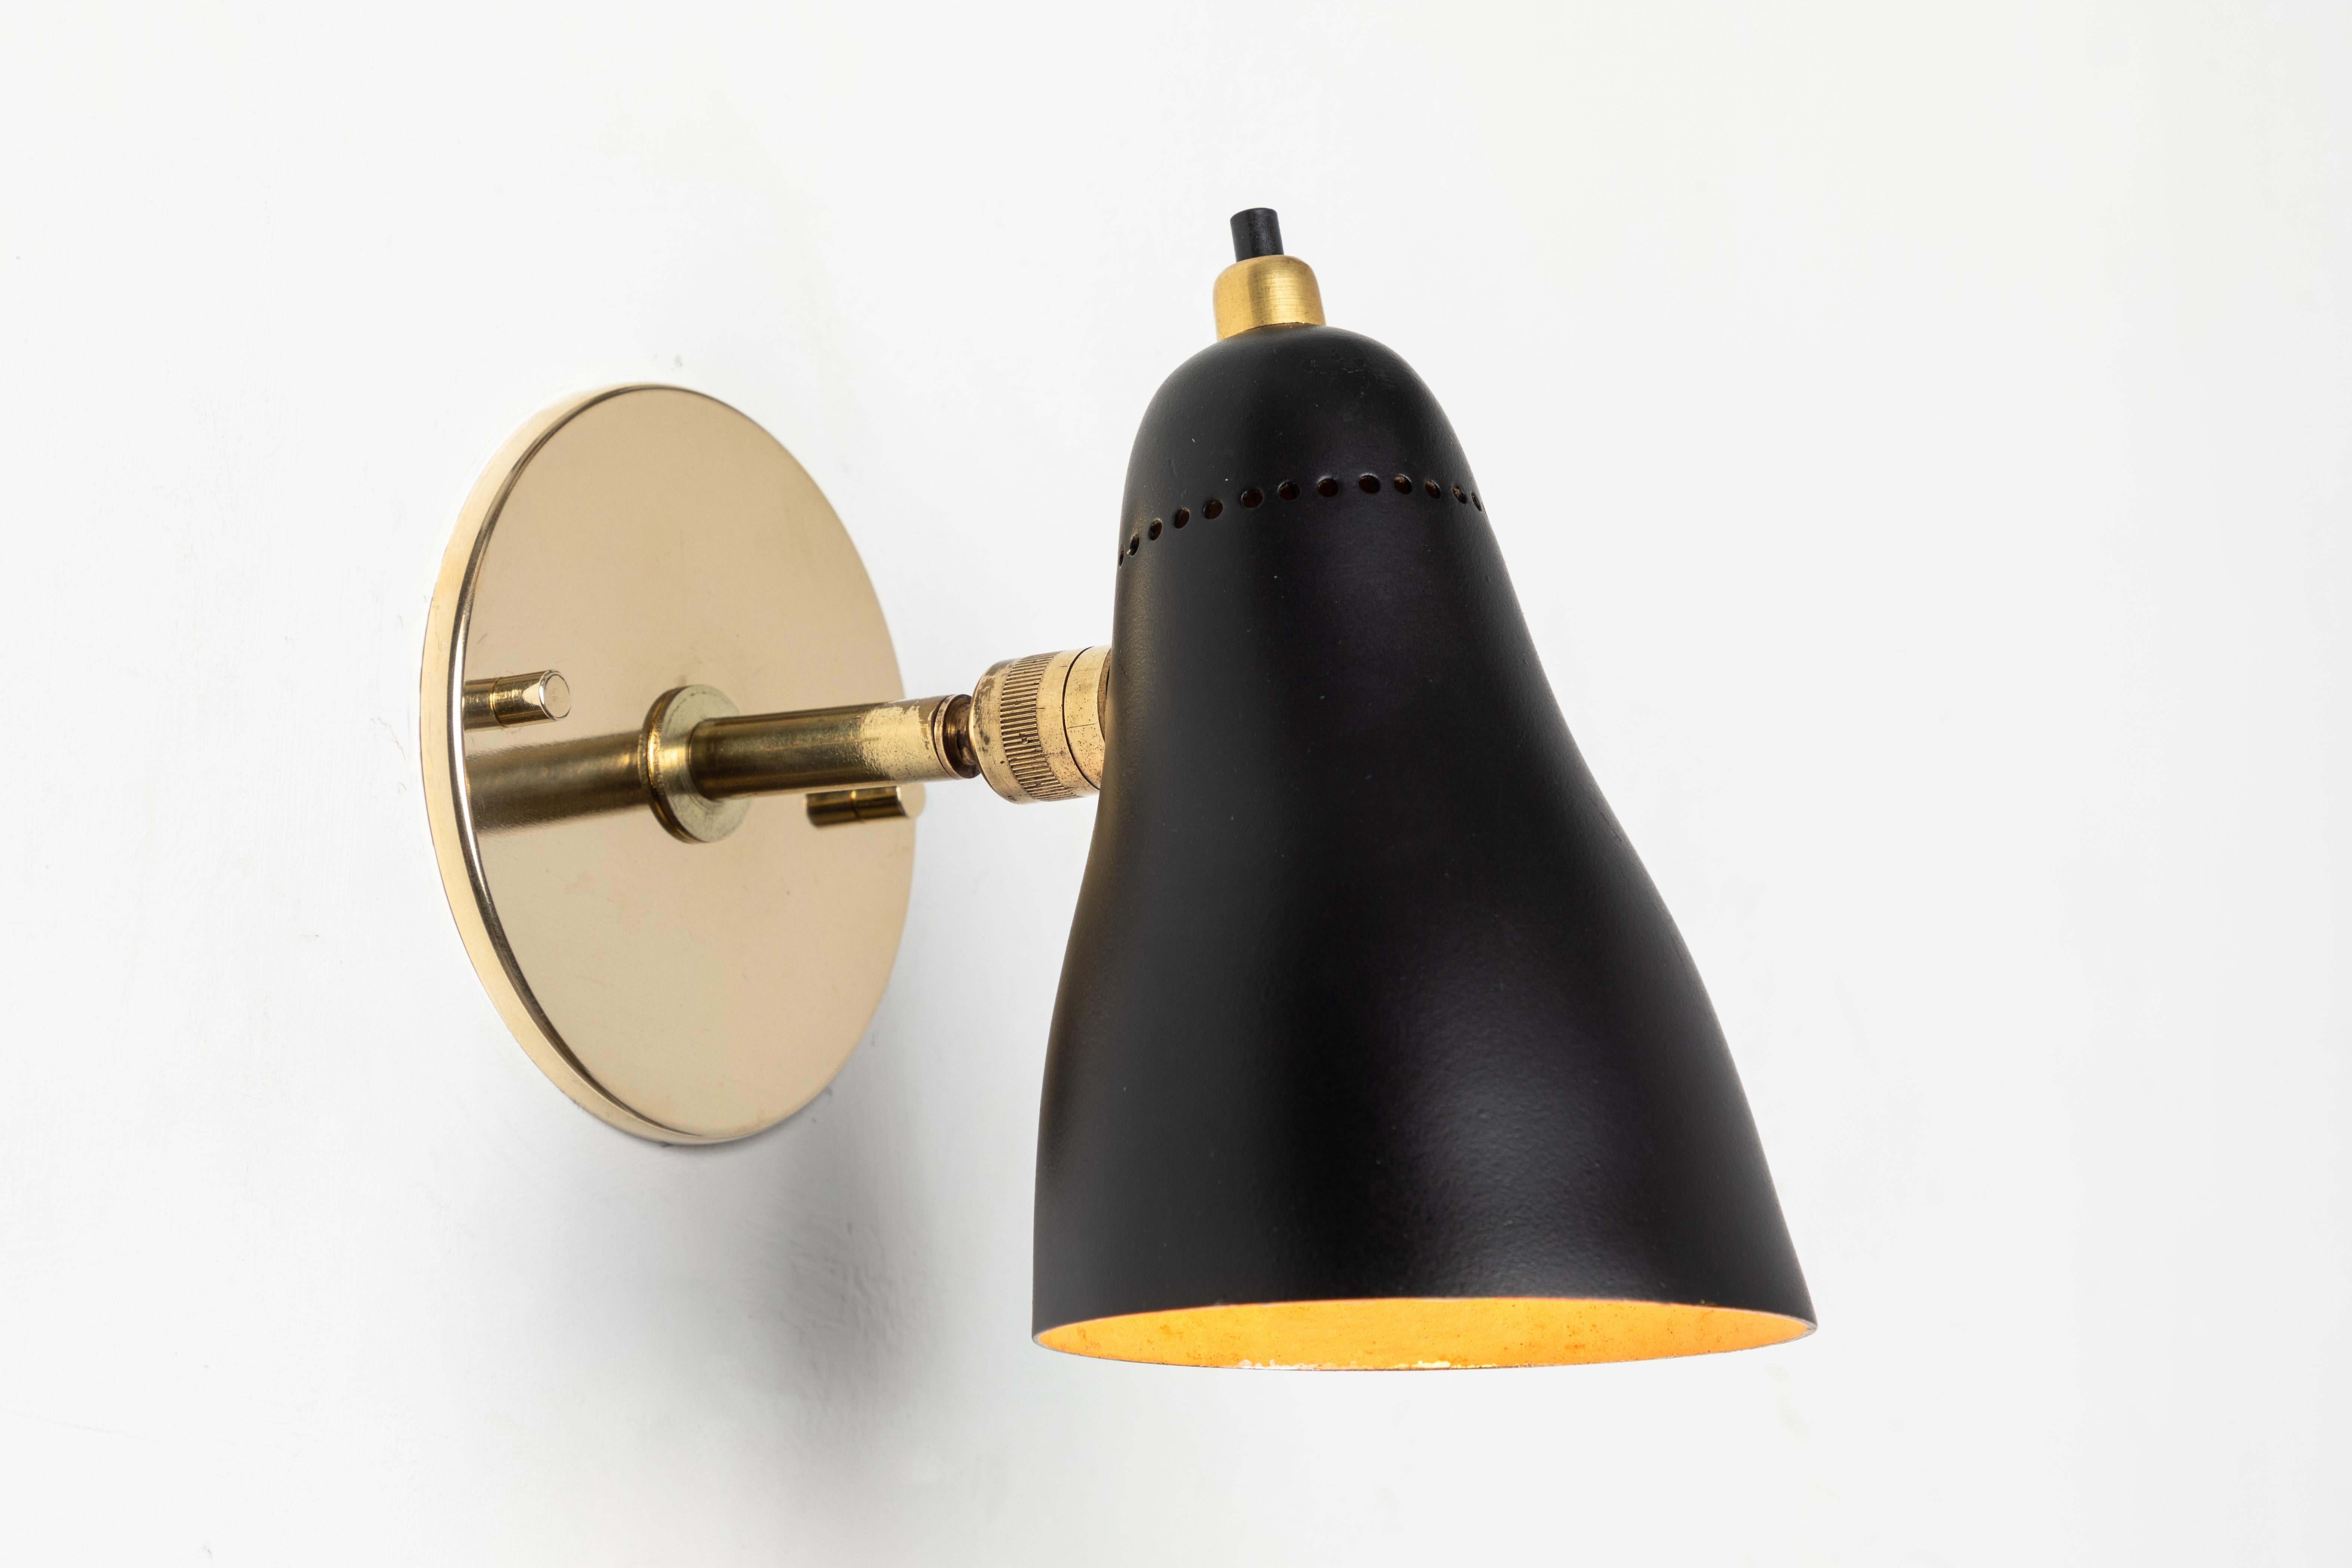 1950s Giuseppe Ostuni articulating sconce for O-Luce. Executed in brass and painted aluminum with perforated shade. Sconce pivots up/down and left/right on two separate ball joints. Original on/off switch on top of lamp. Wired for US electrical